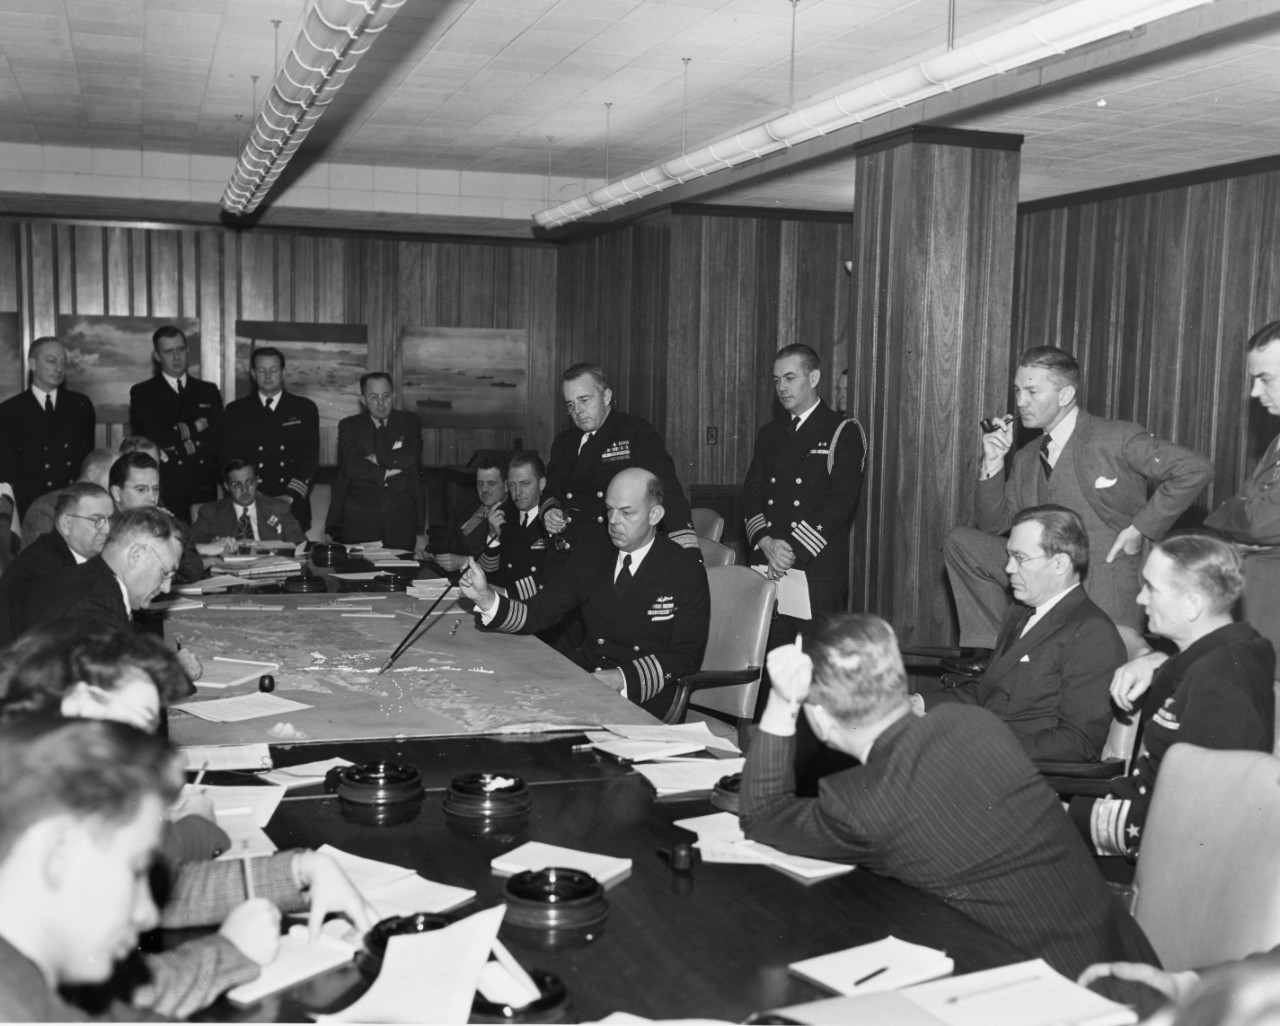 Captain Kenmore M. McManes, USN, describing the Surigao Strait battle of 24 October 1944, to Secretary of the Navy James Forrestal (standing, with pipe) and others in Washington, December 1944.